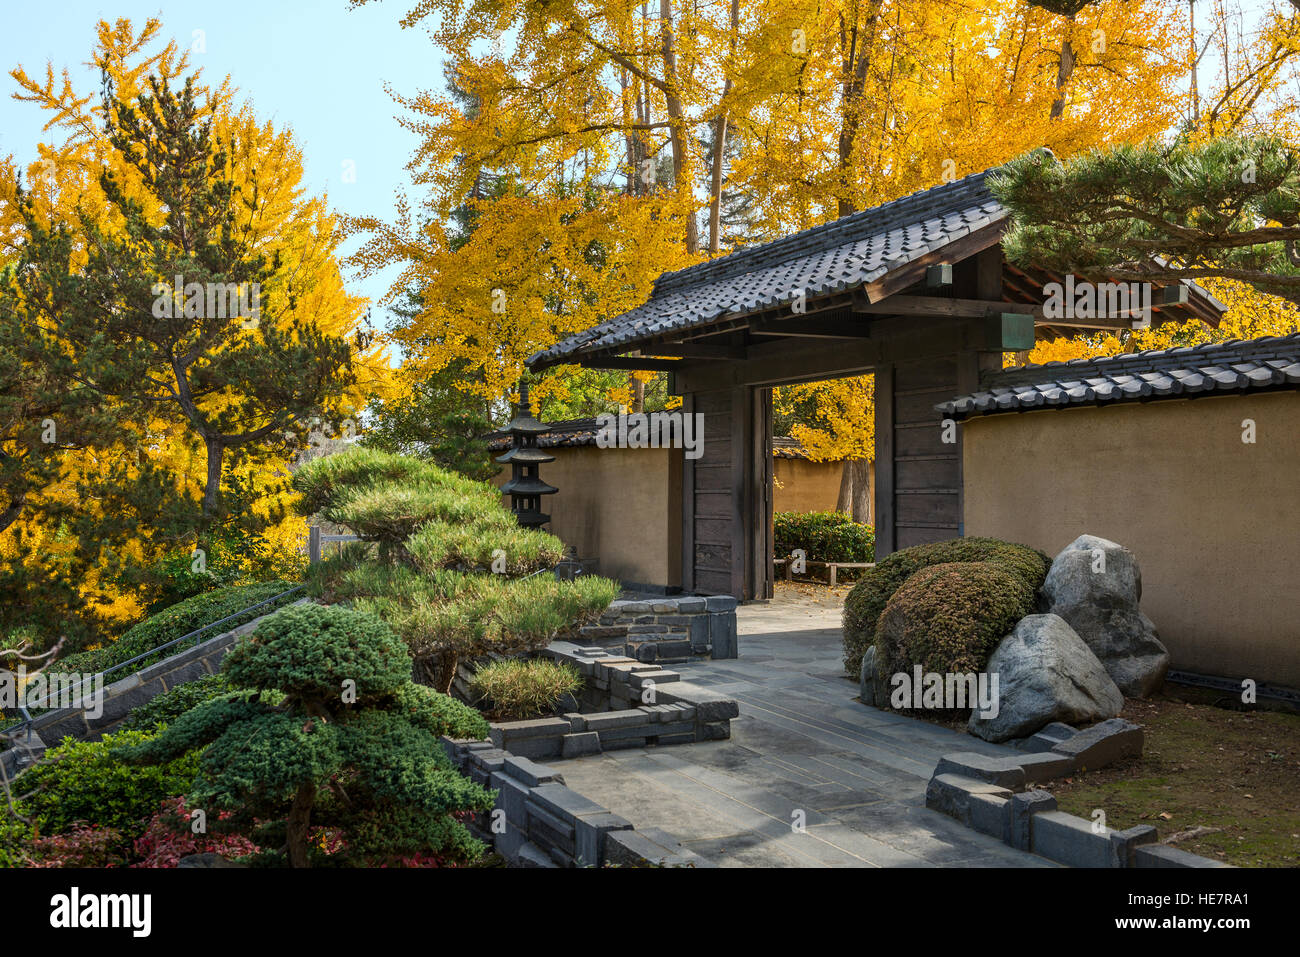 The Beautiful Fall Colors Of The Japanese Gardens In The